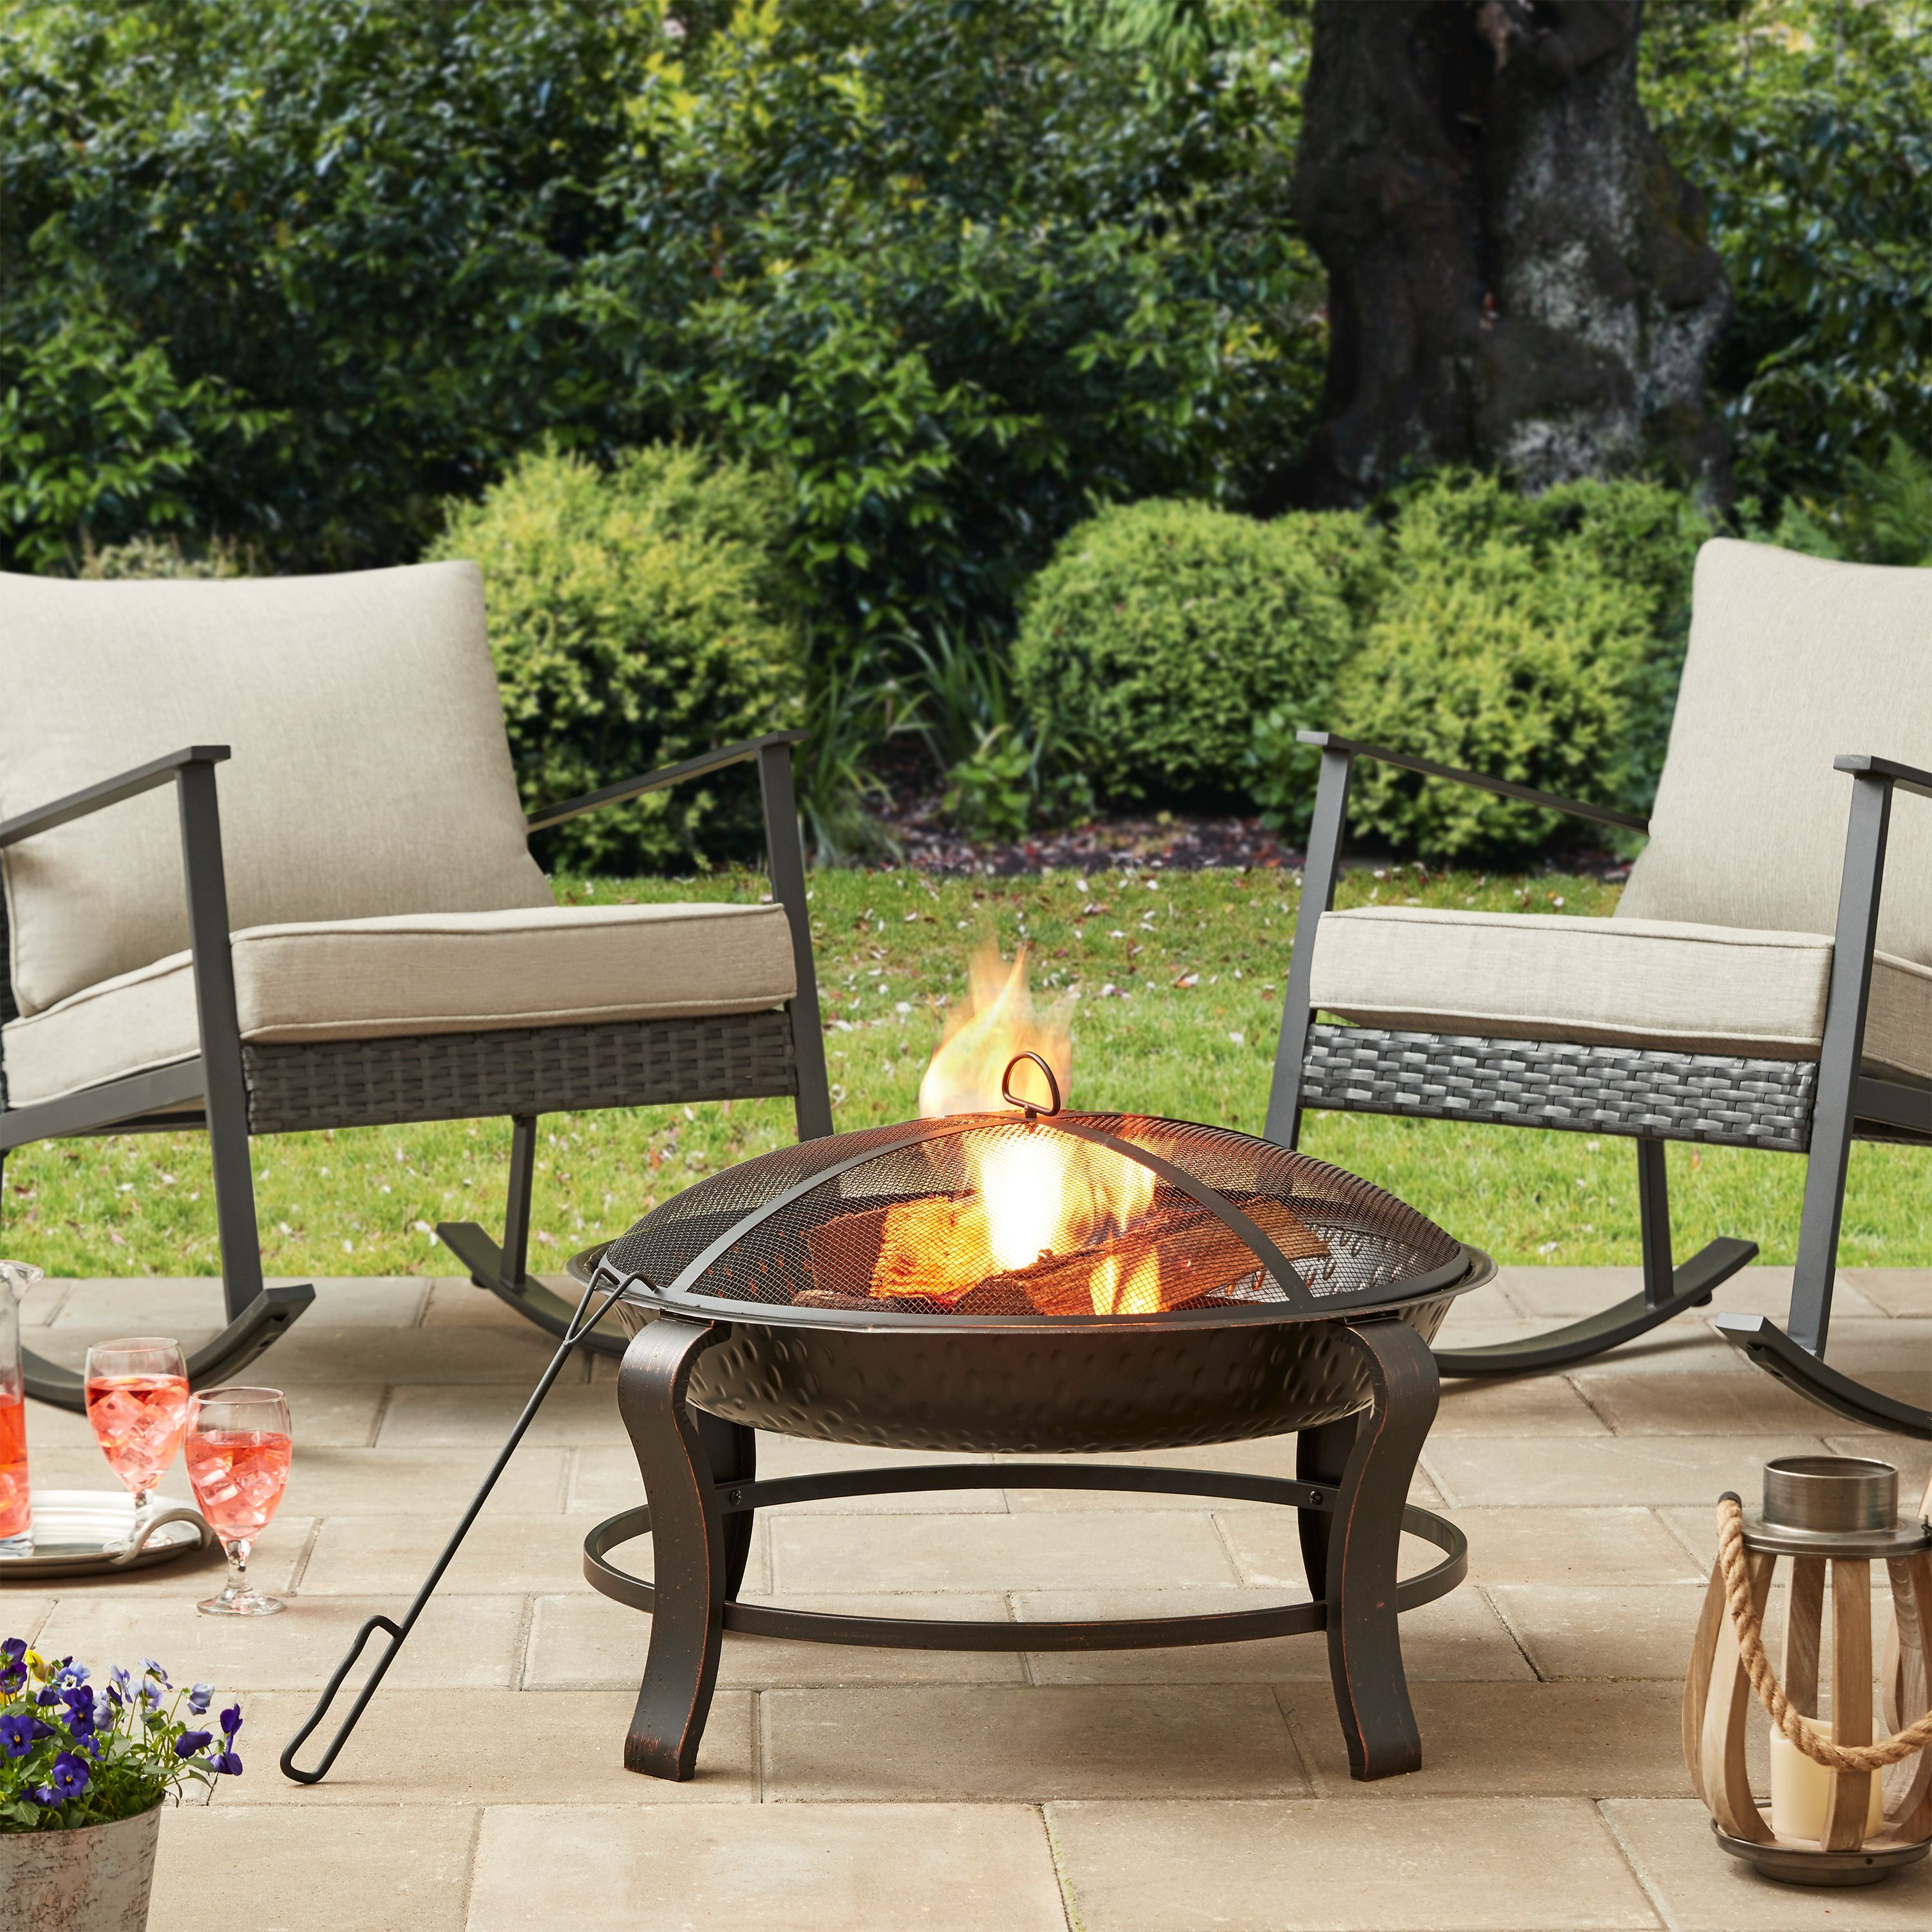 28-Inch Round Wood-Burning Fire Pit